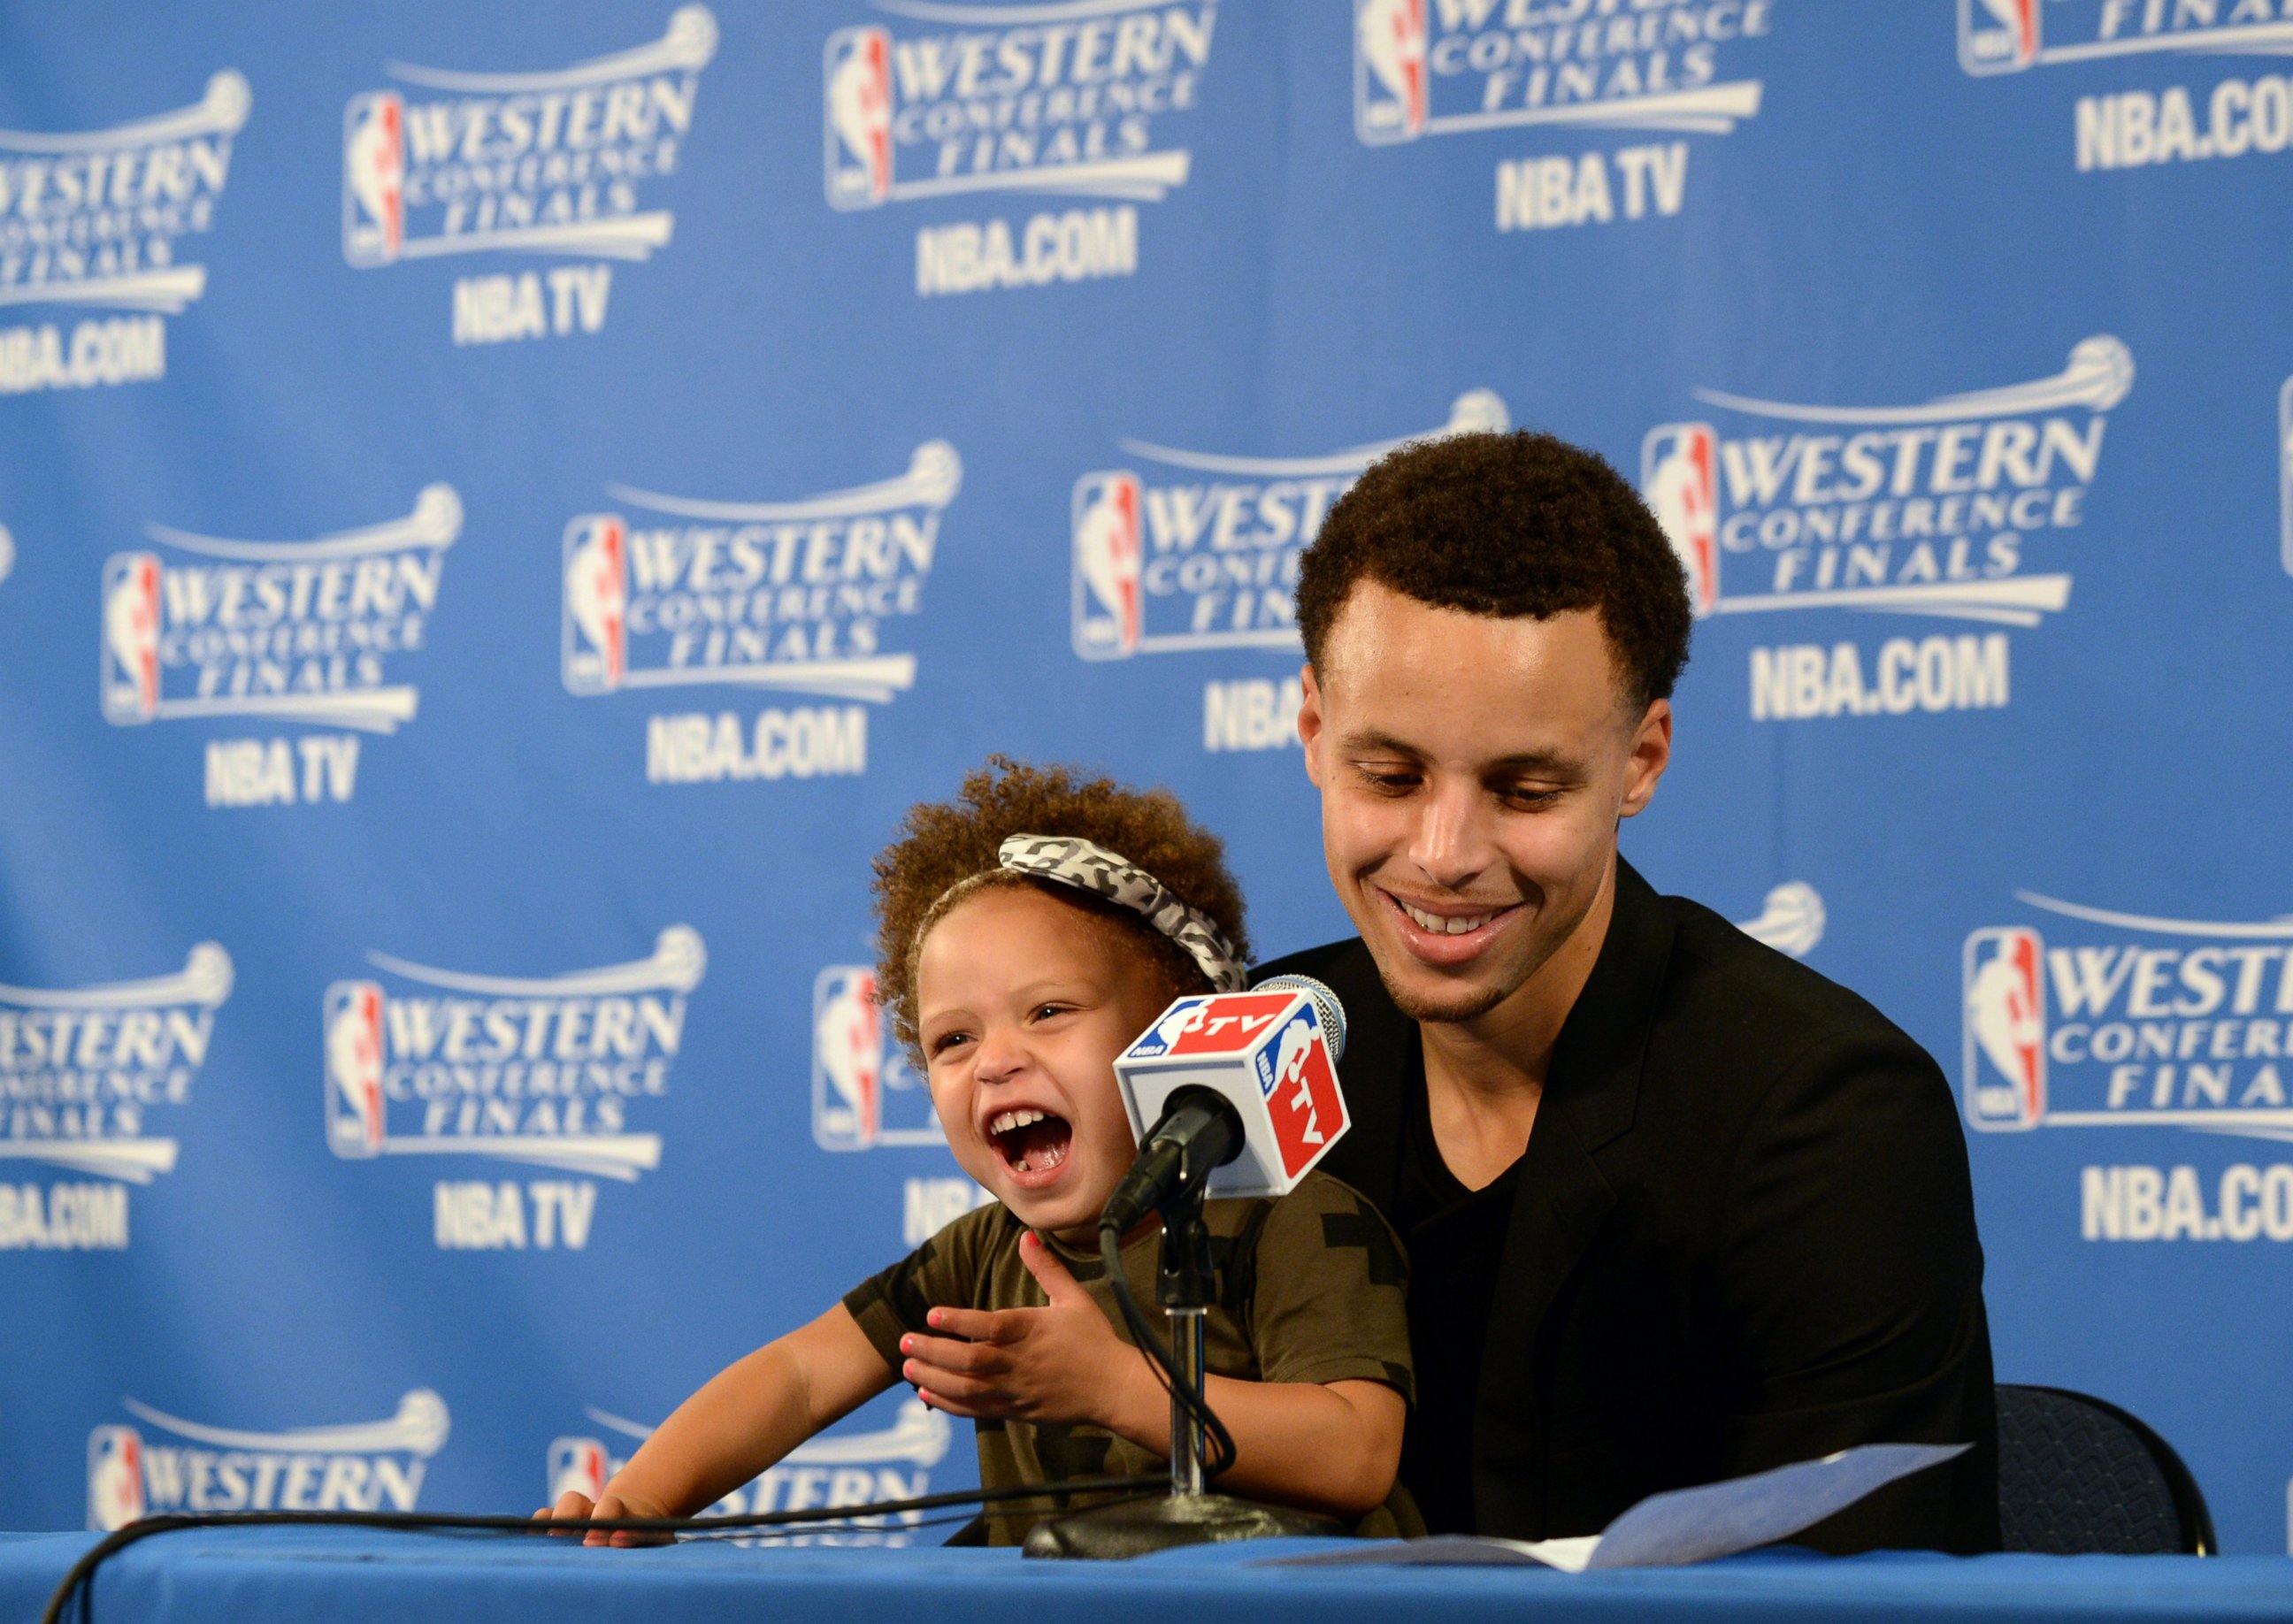 Riley Curry Is the True Champion of the 2015 NBA Playoffs - ABC News